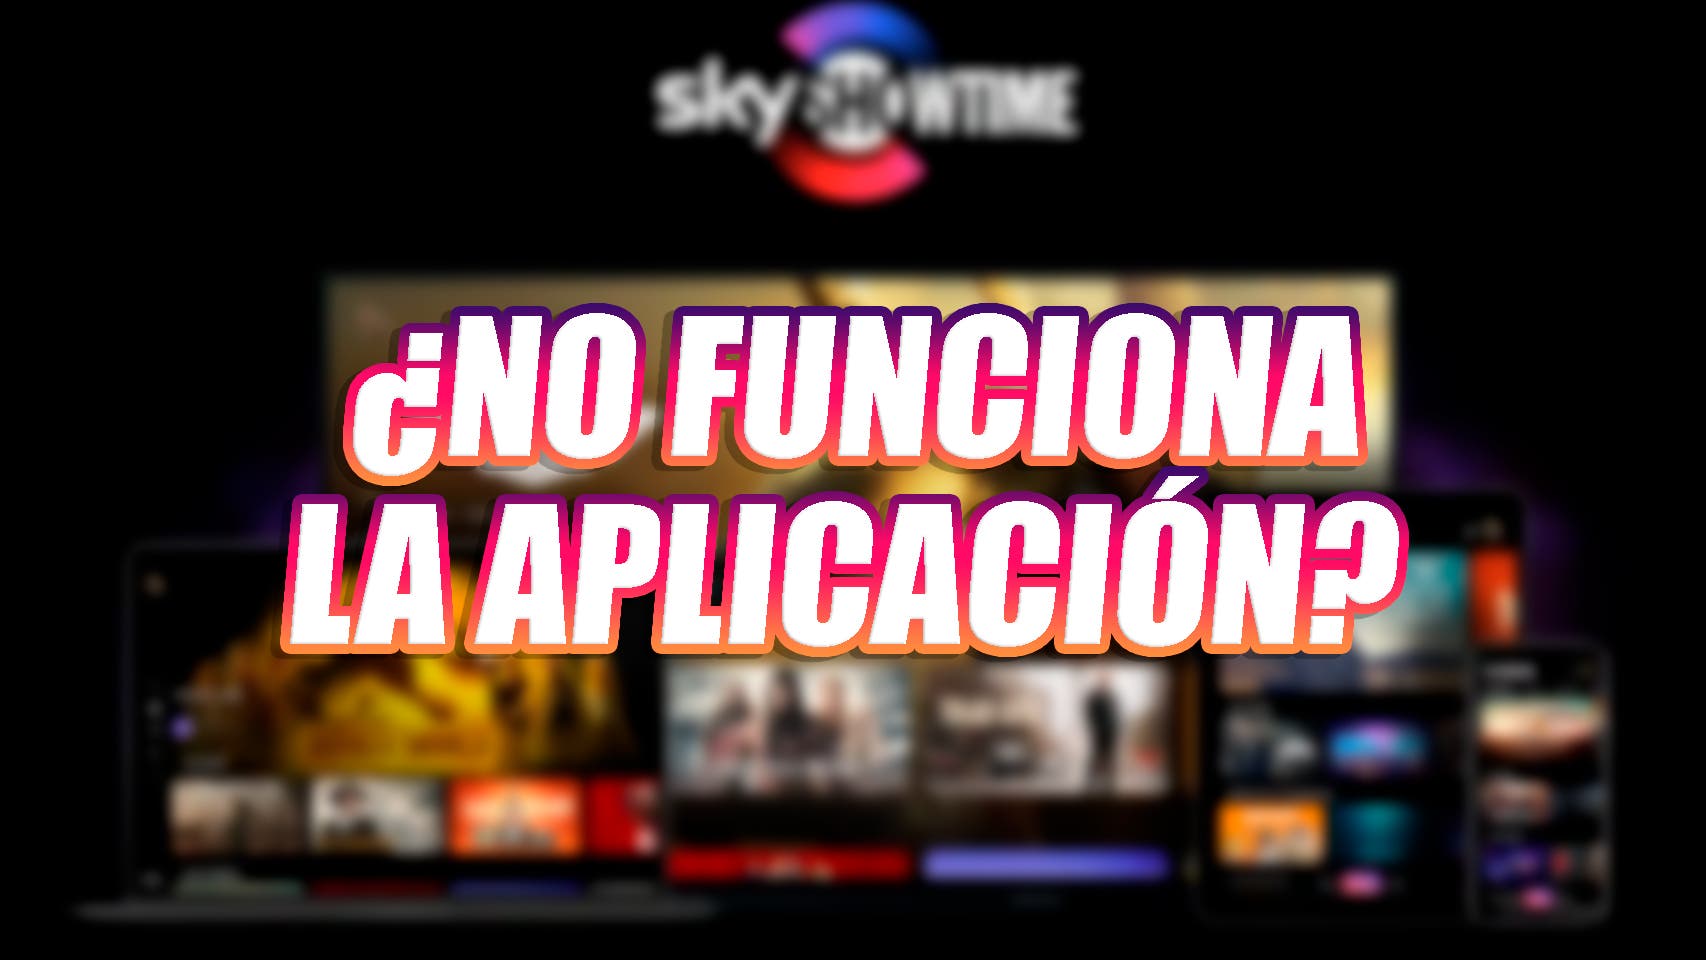 What can I do if the SkyShowtime app is not working?